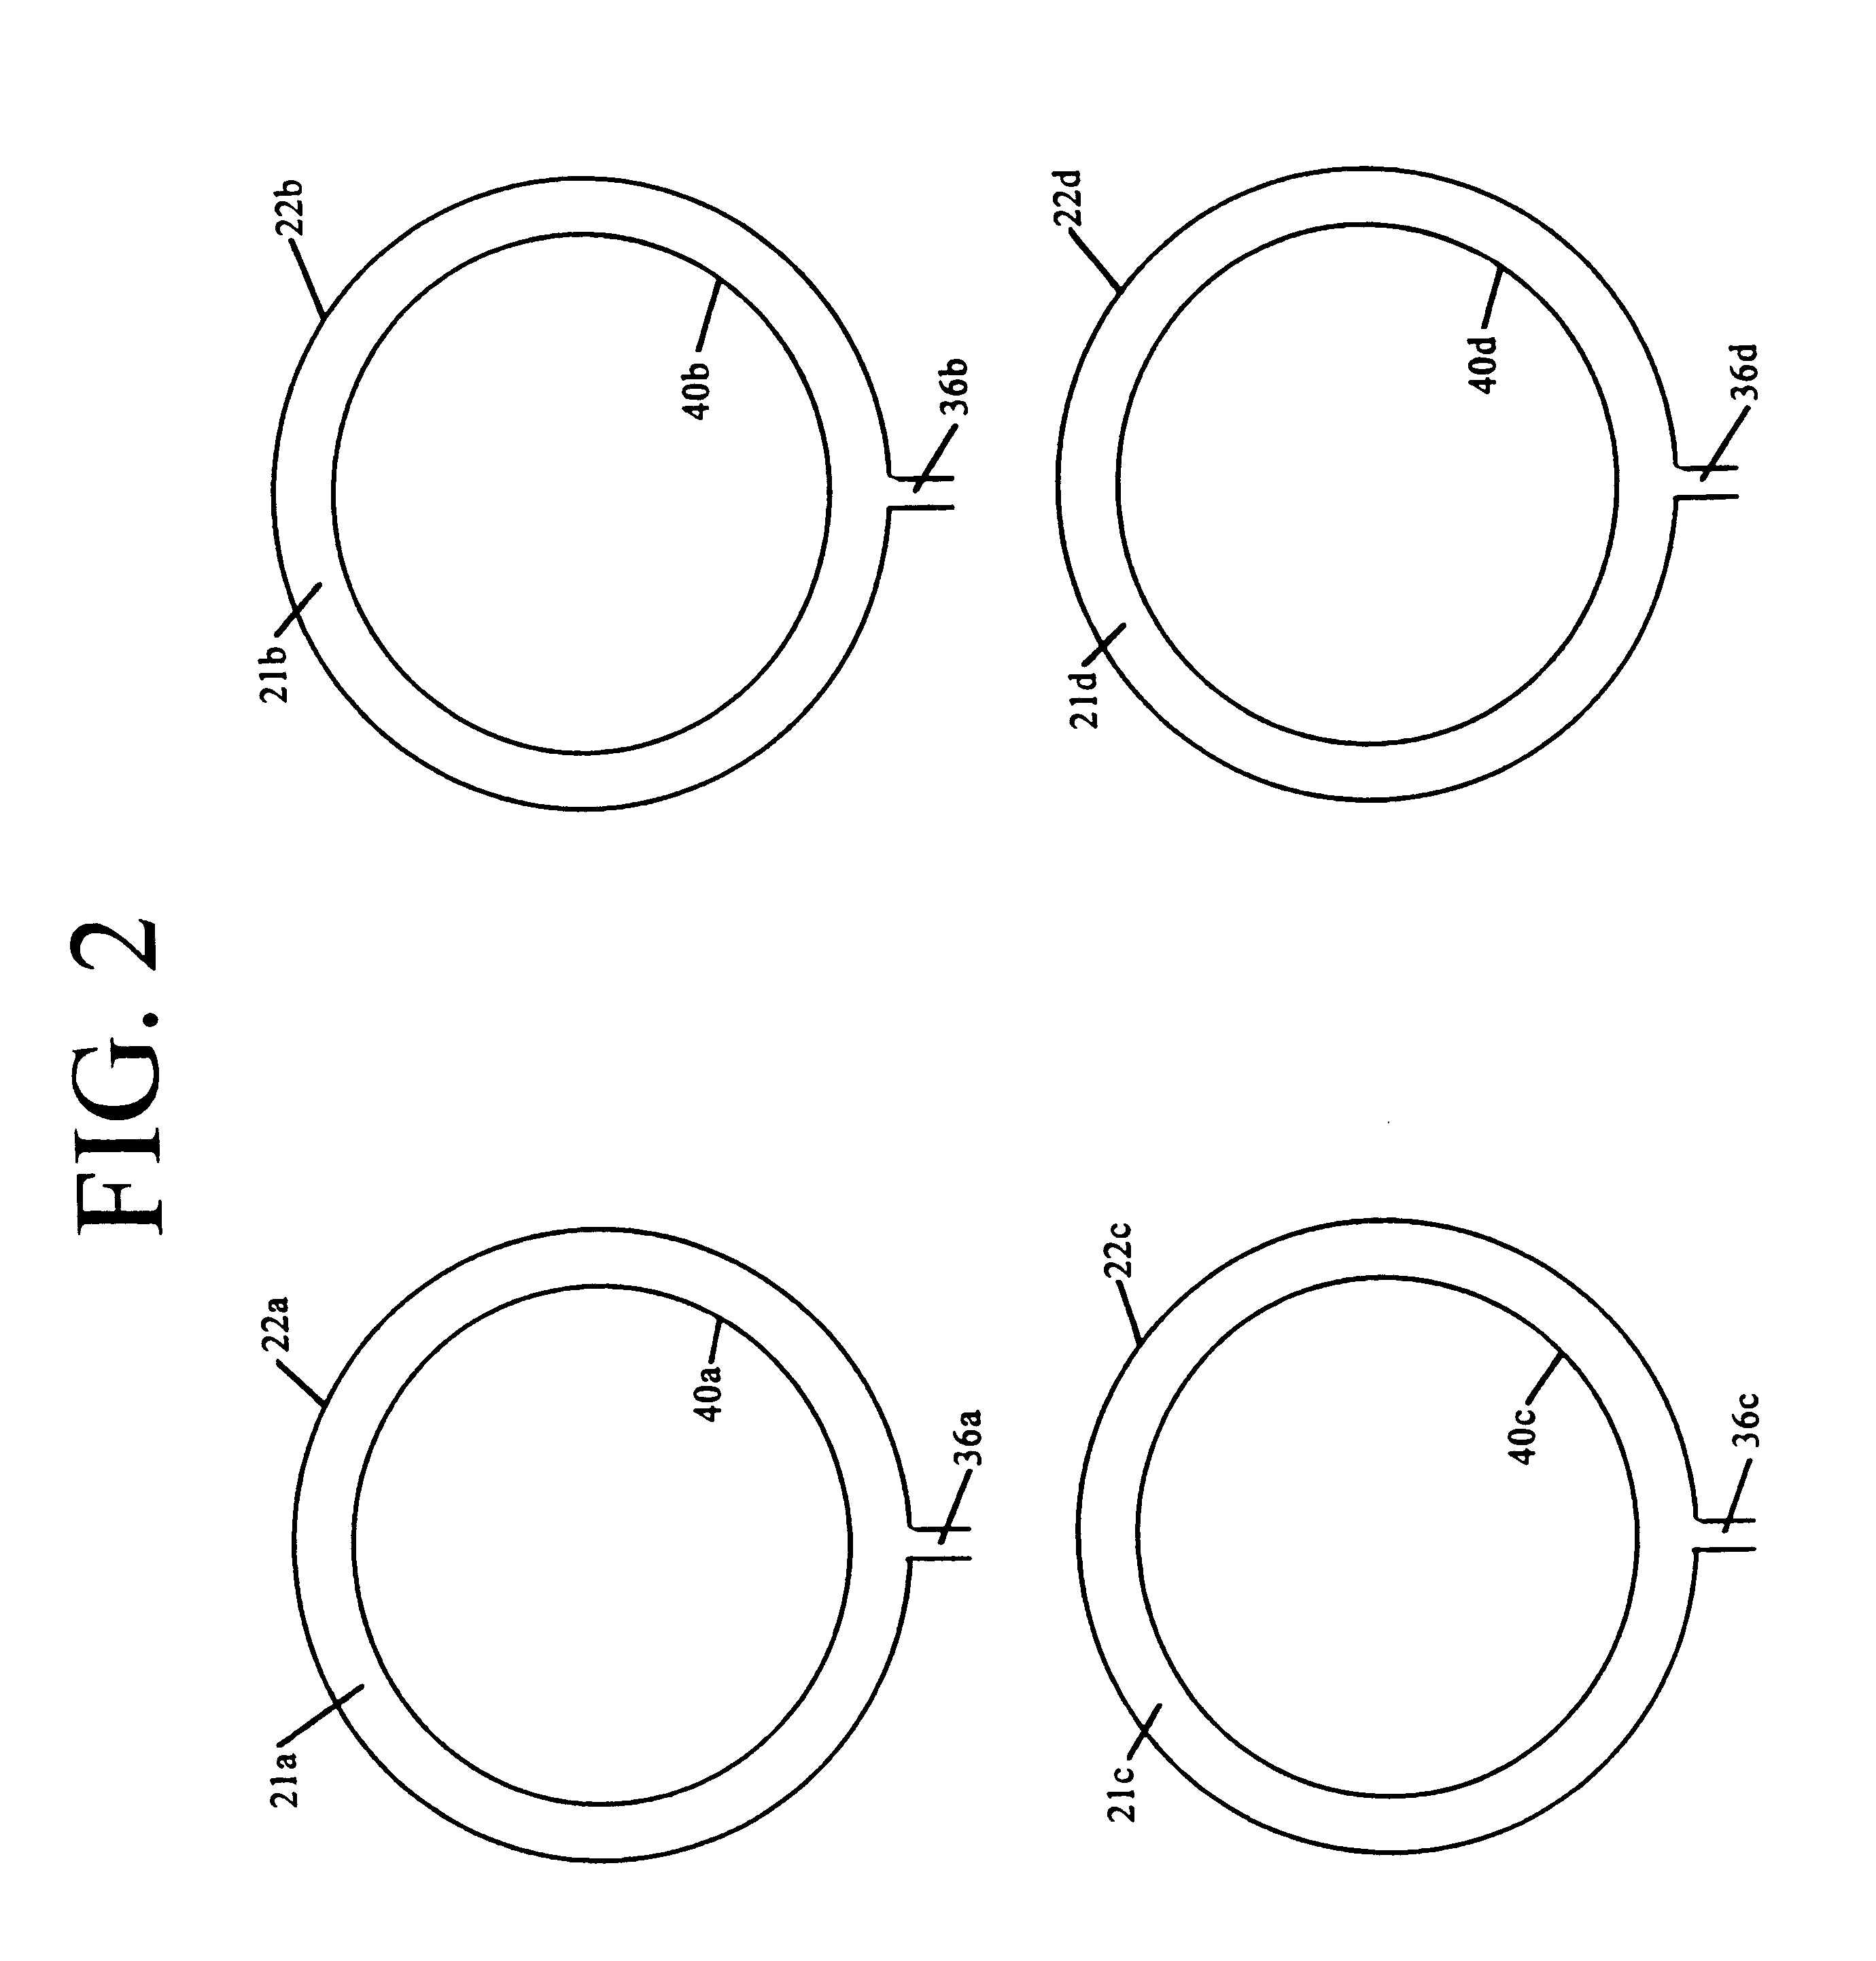 Apparatus and process for the separation of liquids and solids